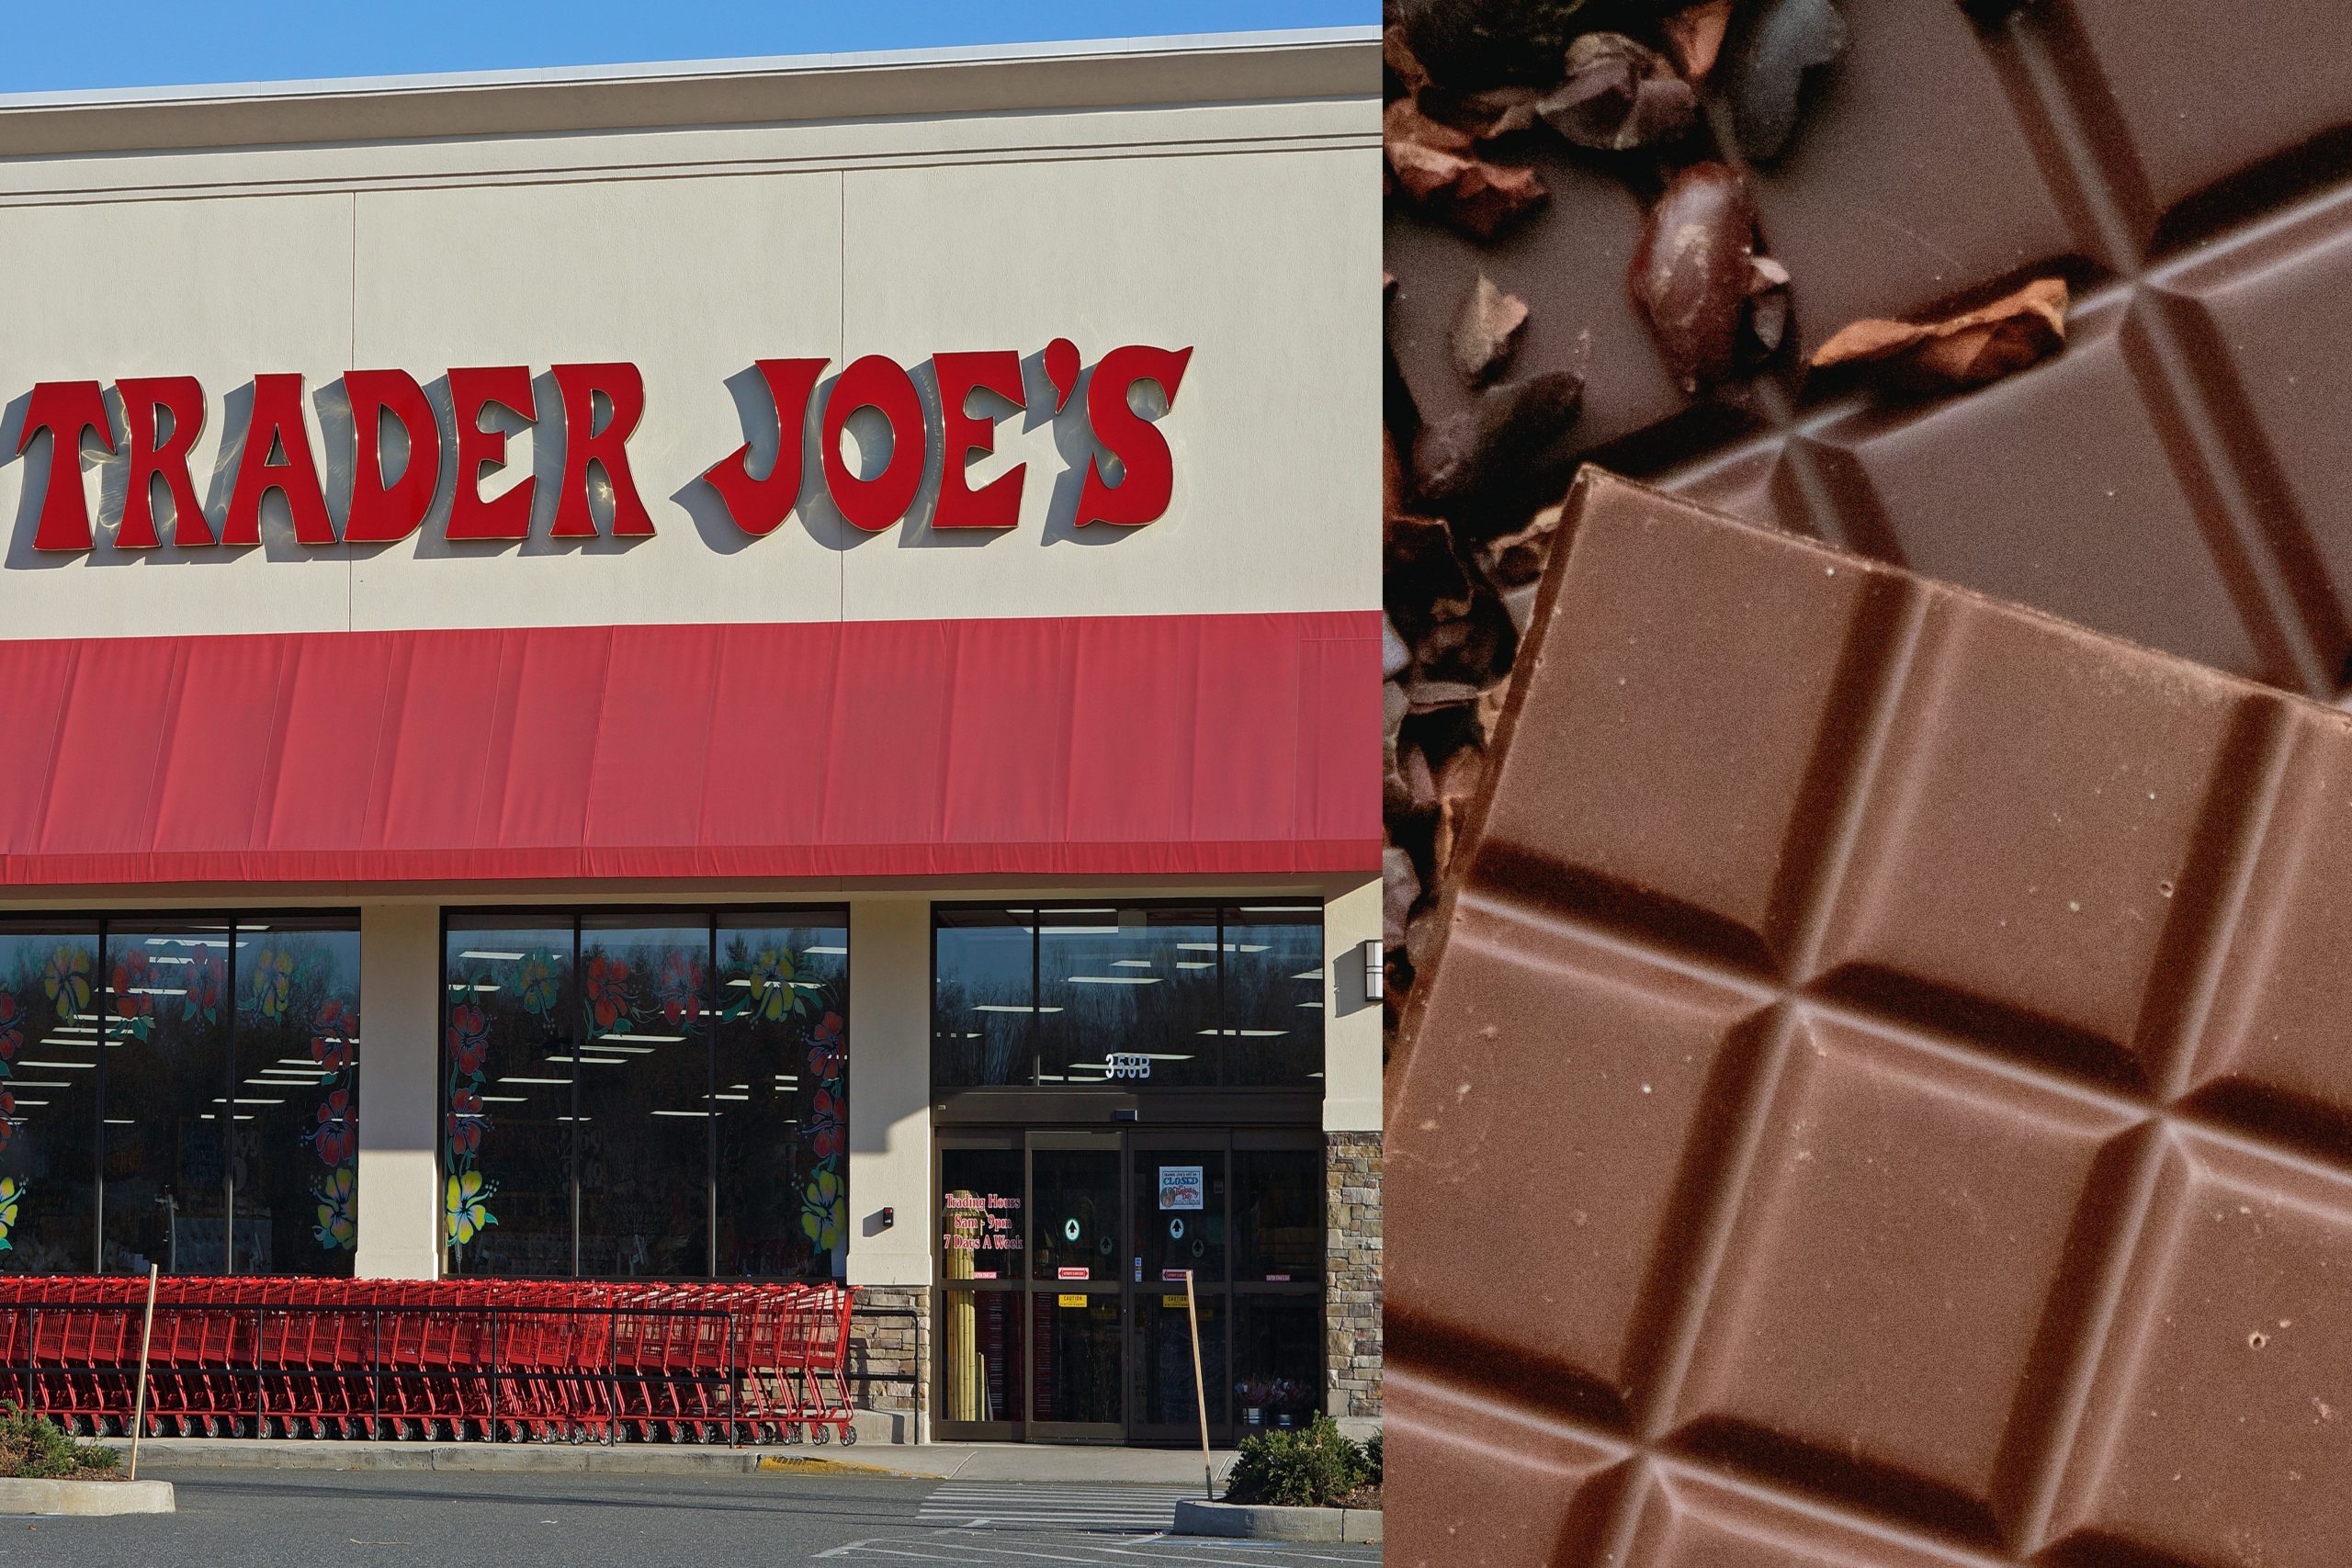 Trader Joe’s and Hershey Face Lawsuit, Lead and Cadmium Found in Chocolate Products Pose Serious Health Risks